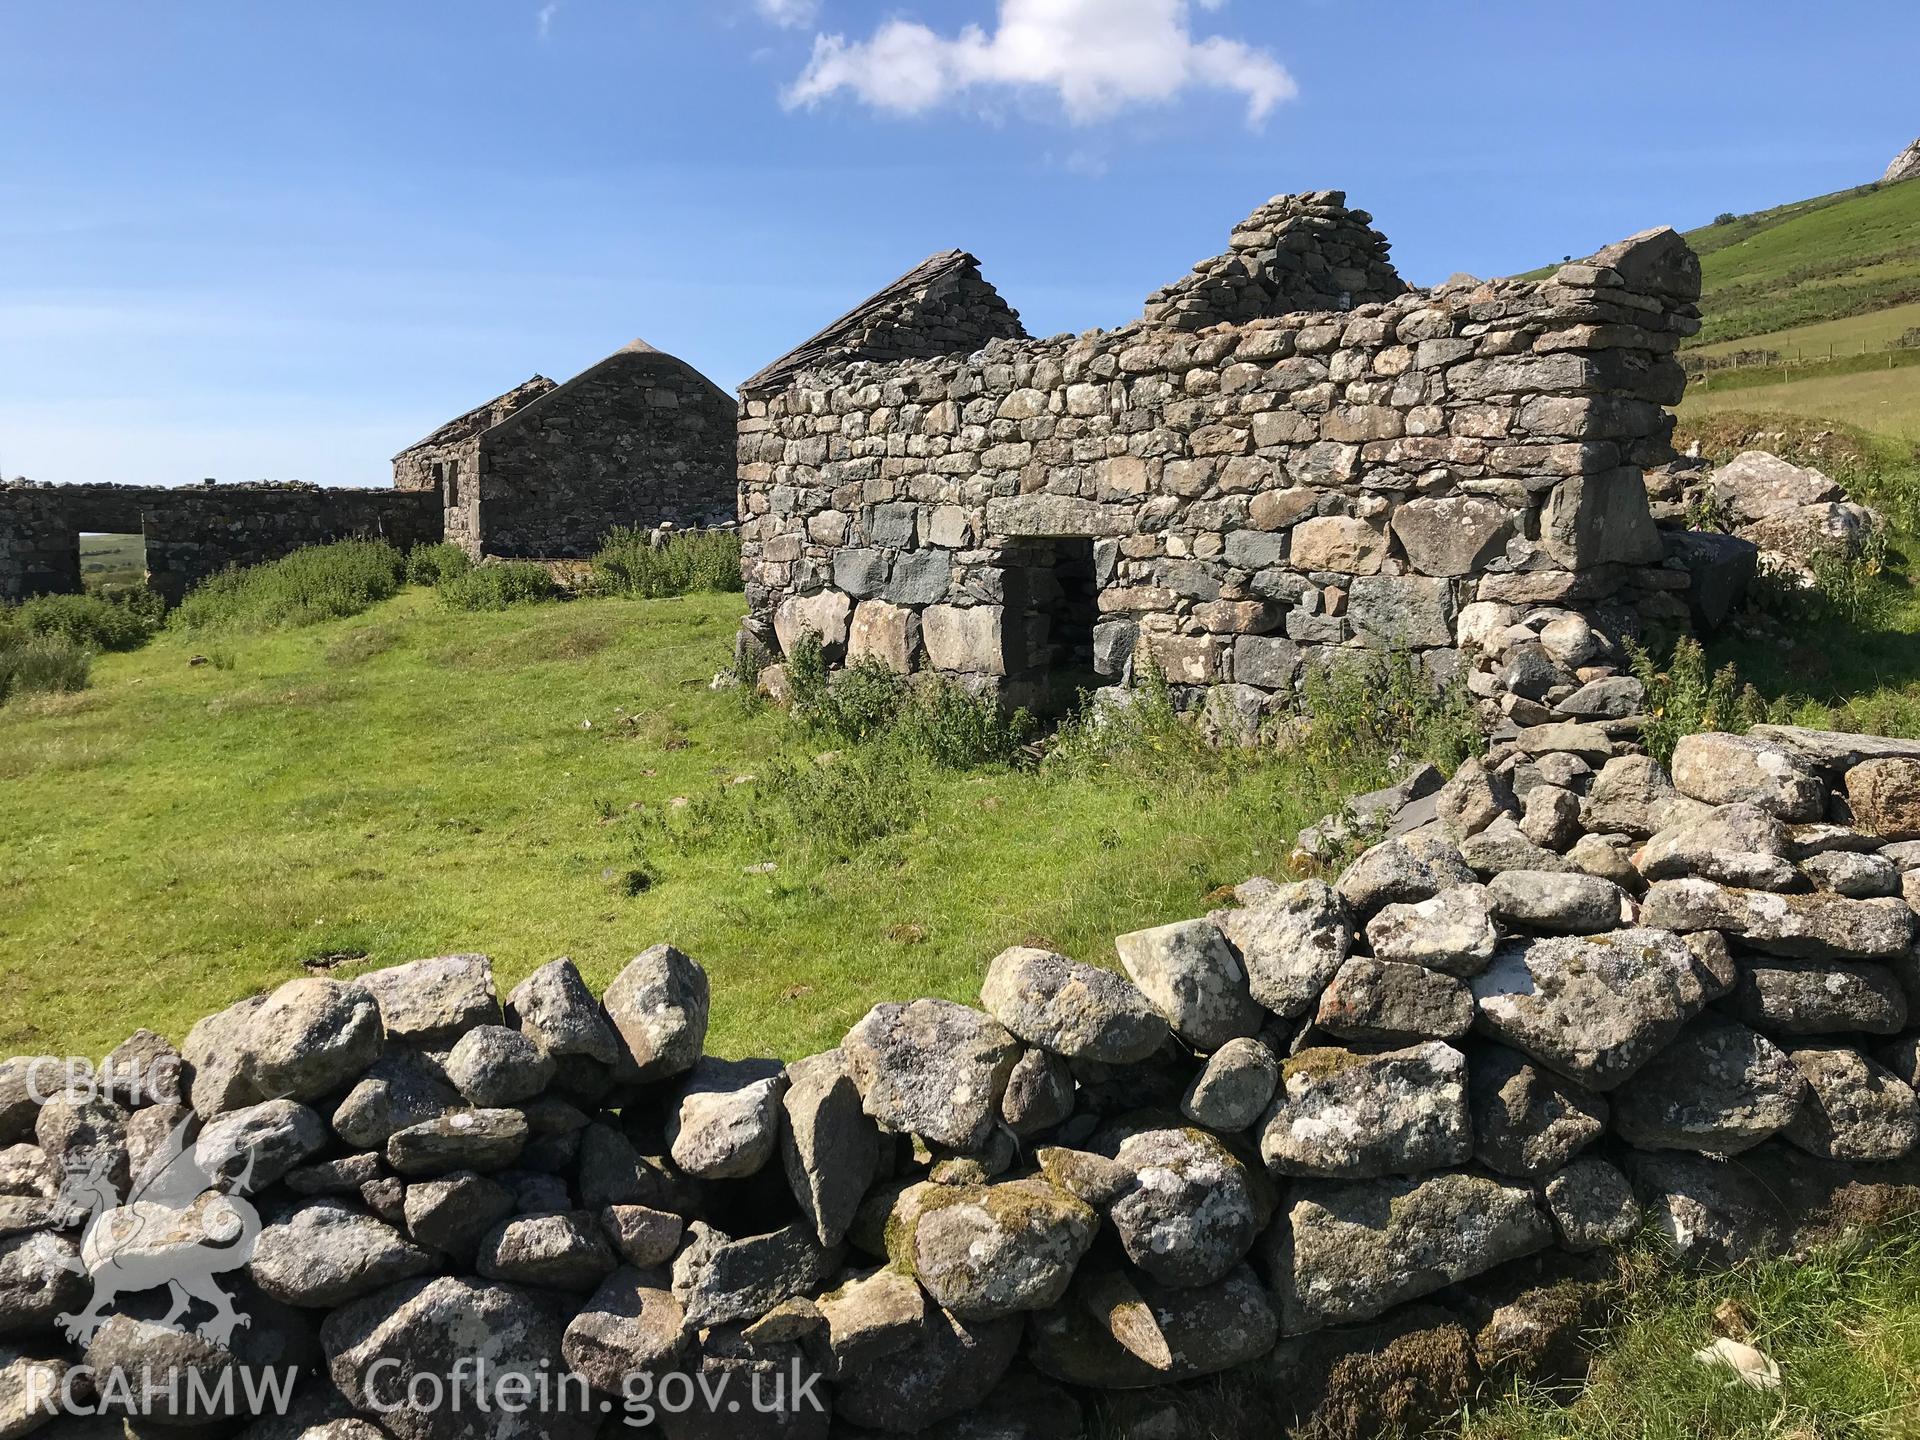 Colour photo showing view of drystone walls and remnants of possible outbuildings at Cae-Mwynen house, Clynnog, taken by Paul R. Davis, 24th June 2018.